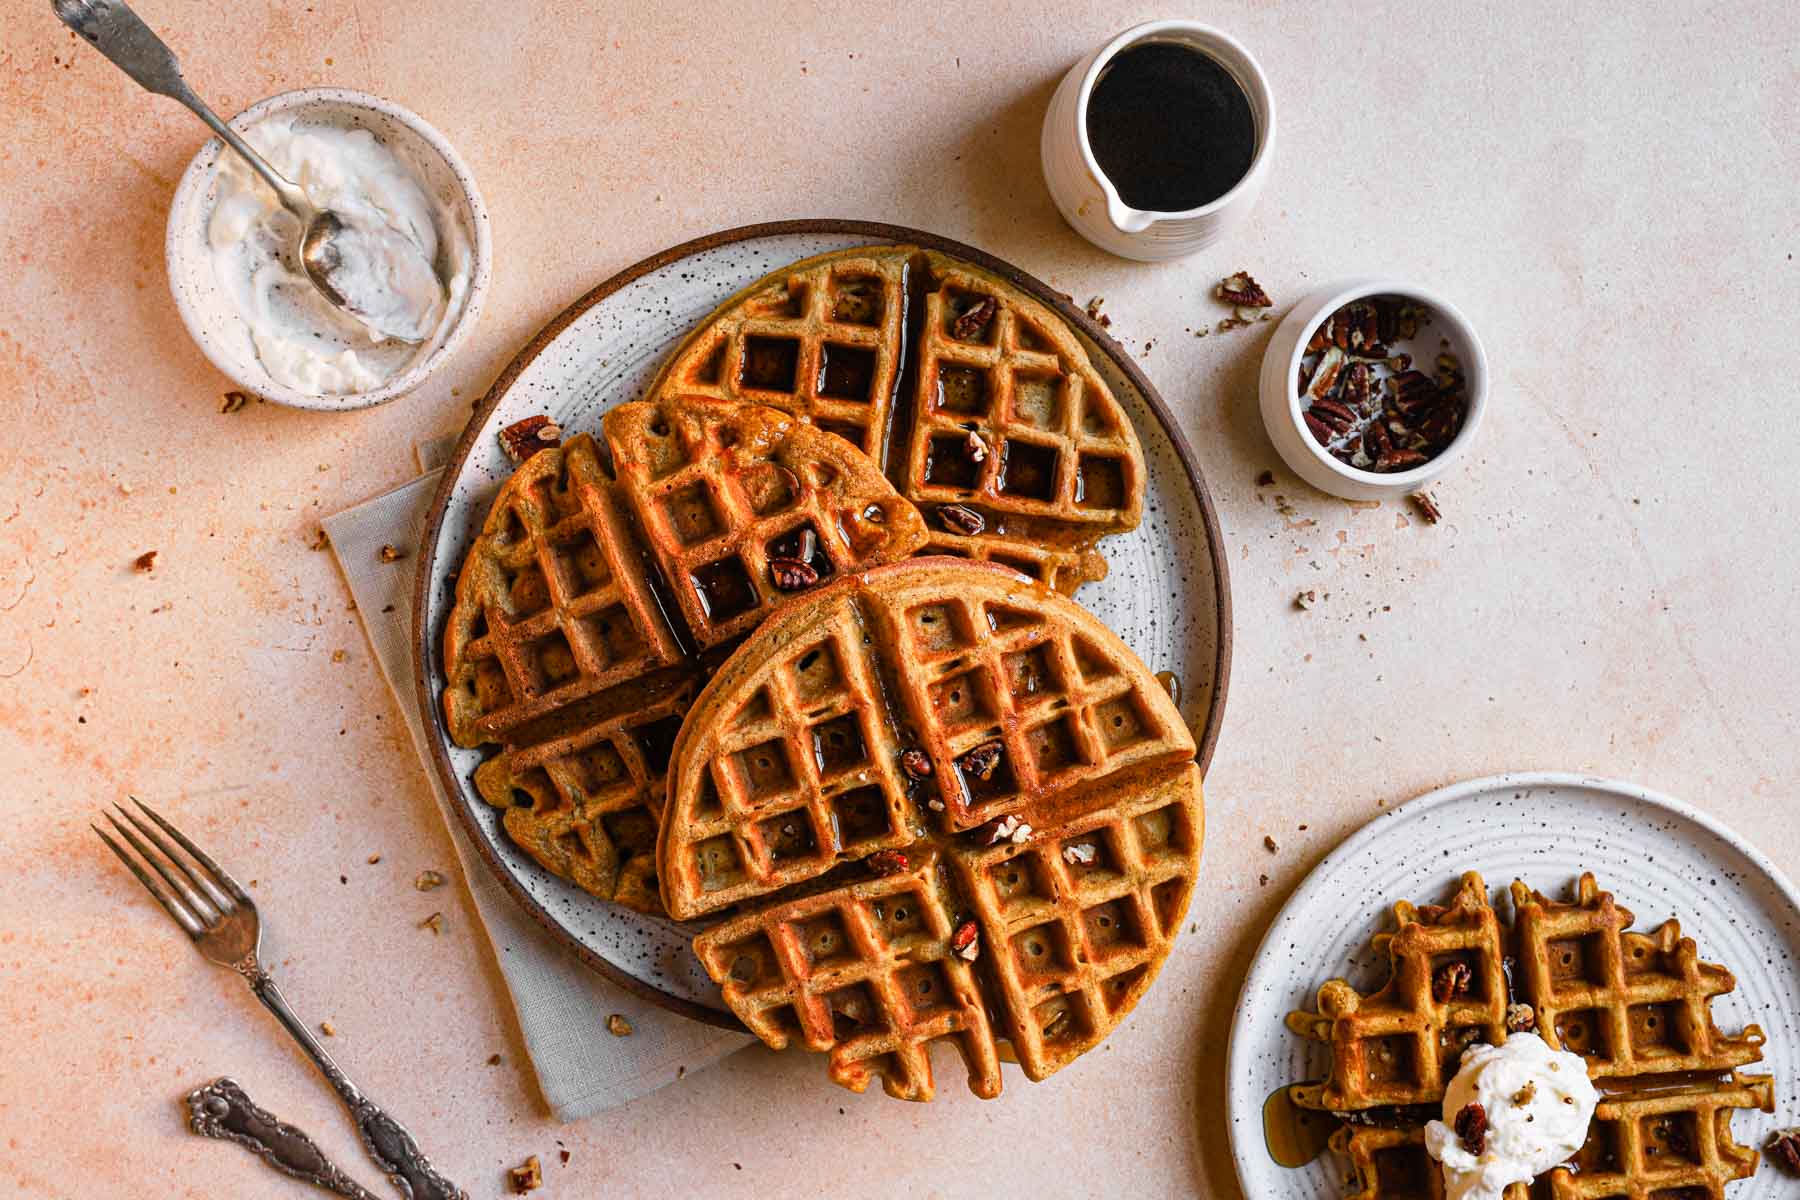 Three homemade pumpkin waffles are served on a plate next to a cup of coffee.